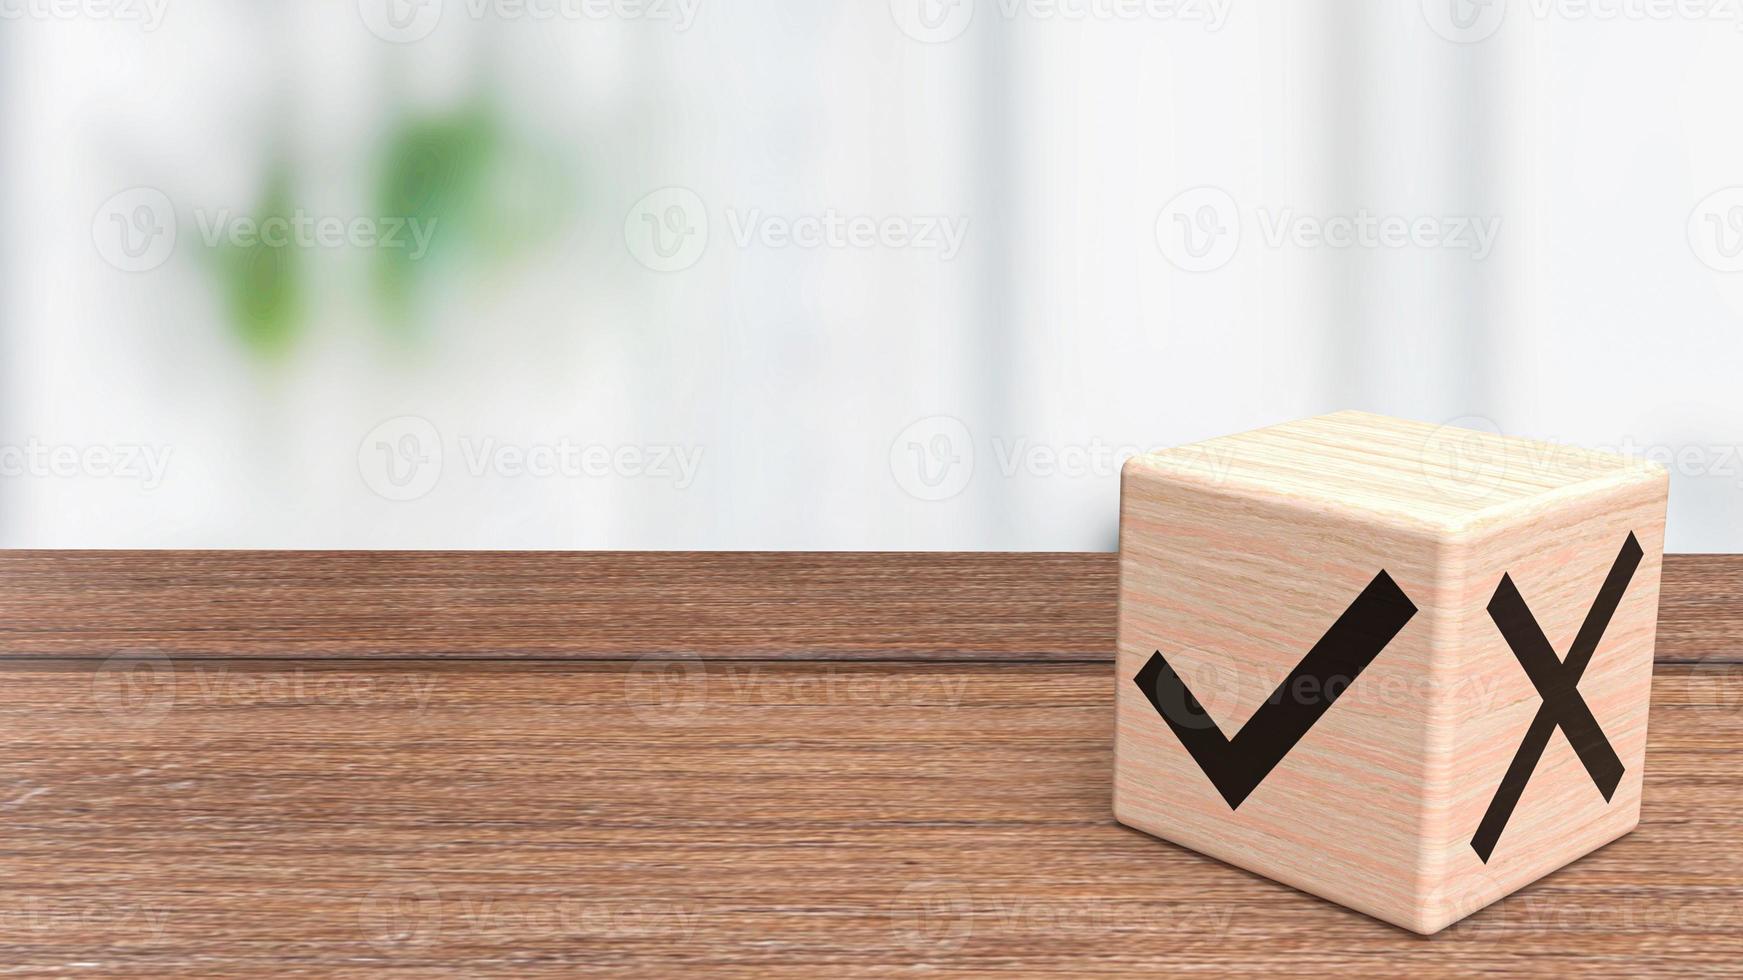 The right and wrong symbol on wood cube 3d rendering photo